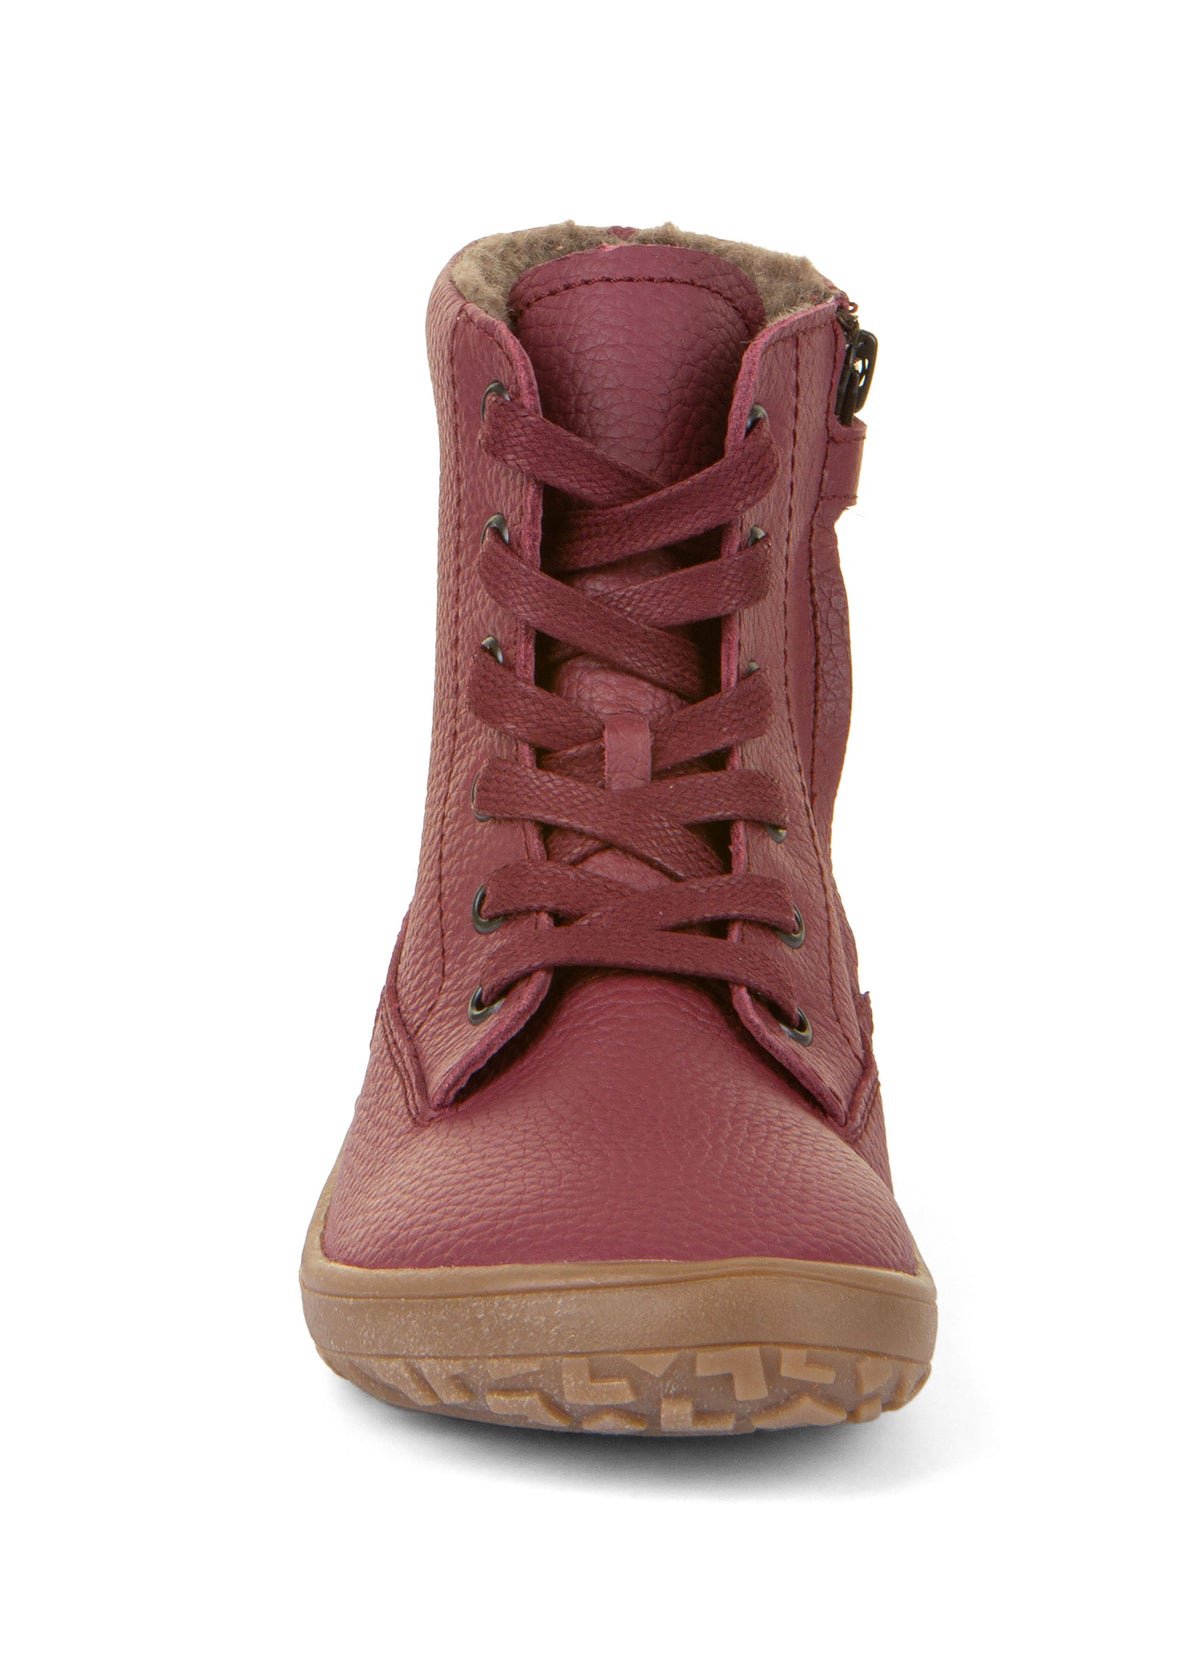 Barefoot shoes - leather winter shoes, TEX Laces - burgundy